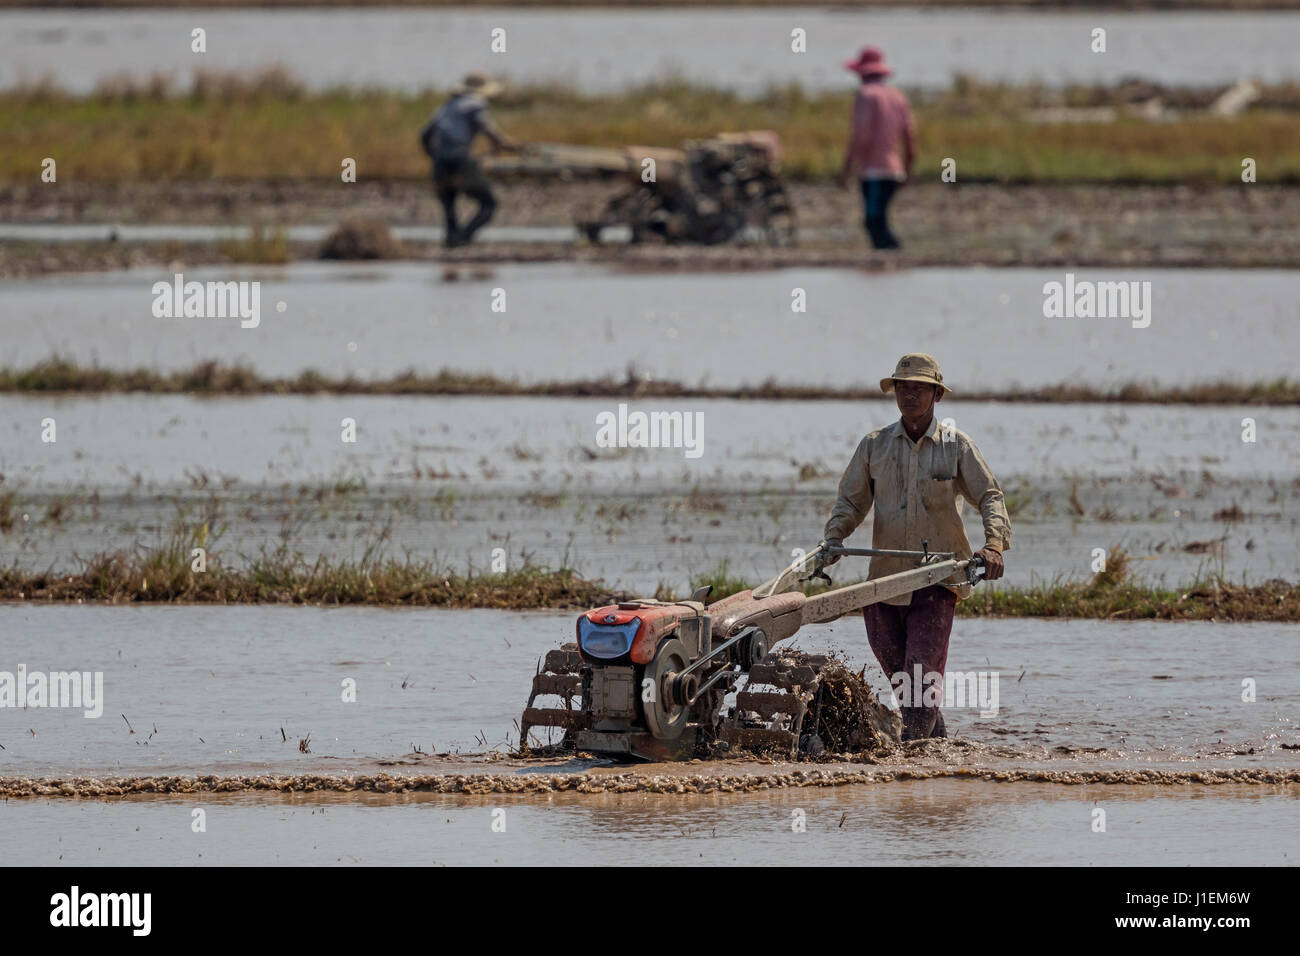 Men cultivate rice paddy. Cultivation of rice field Stock Photo